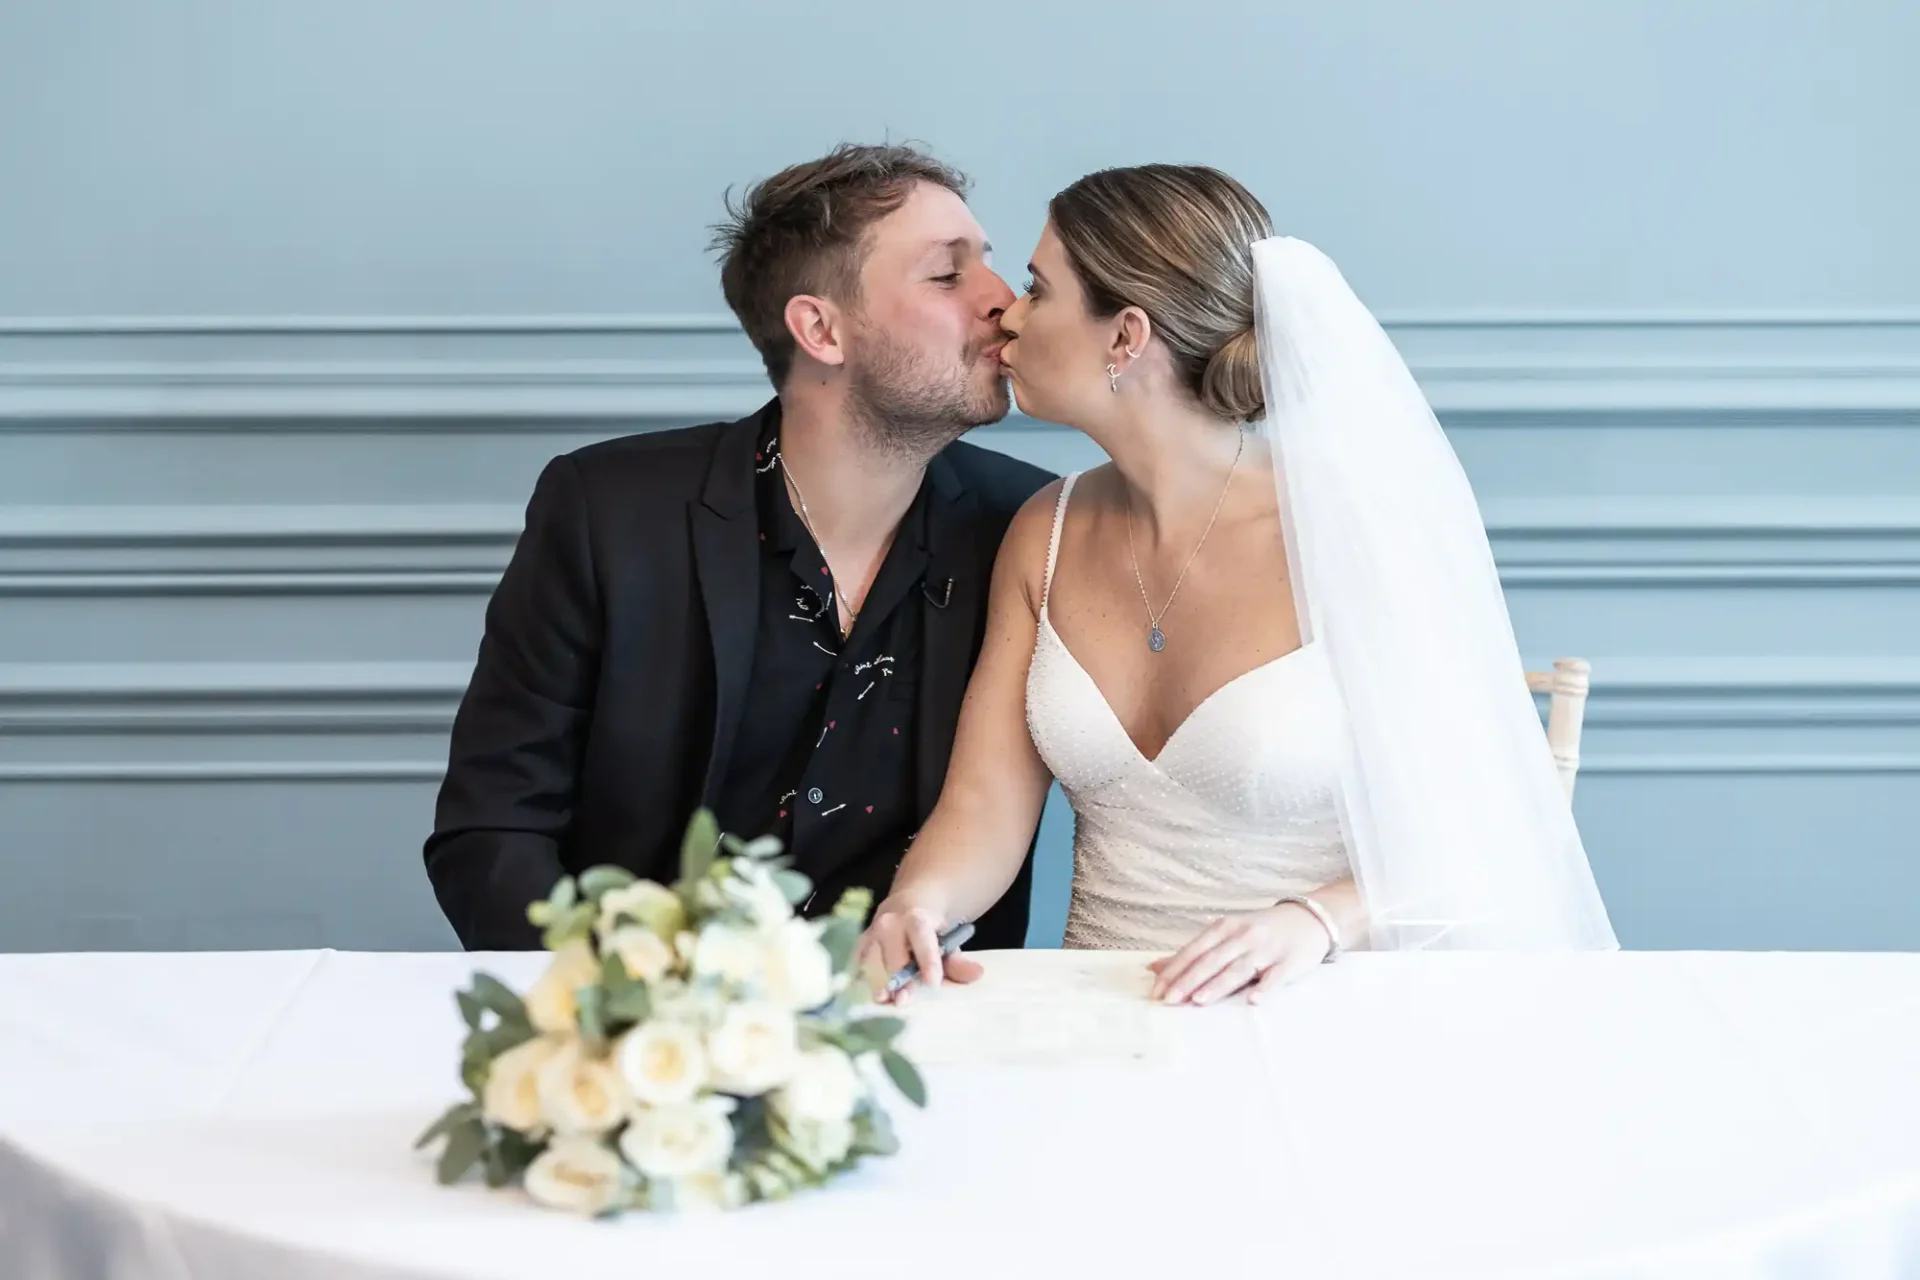 A bride and groom kissing at a signing table with a bouquet of white roses in the foreground.